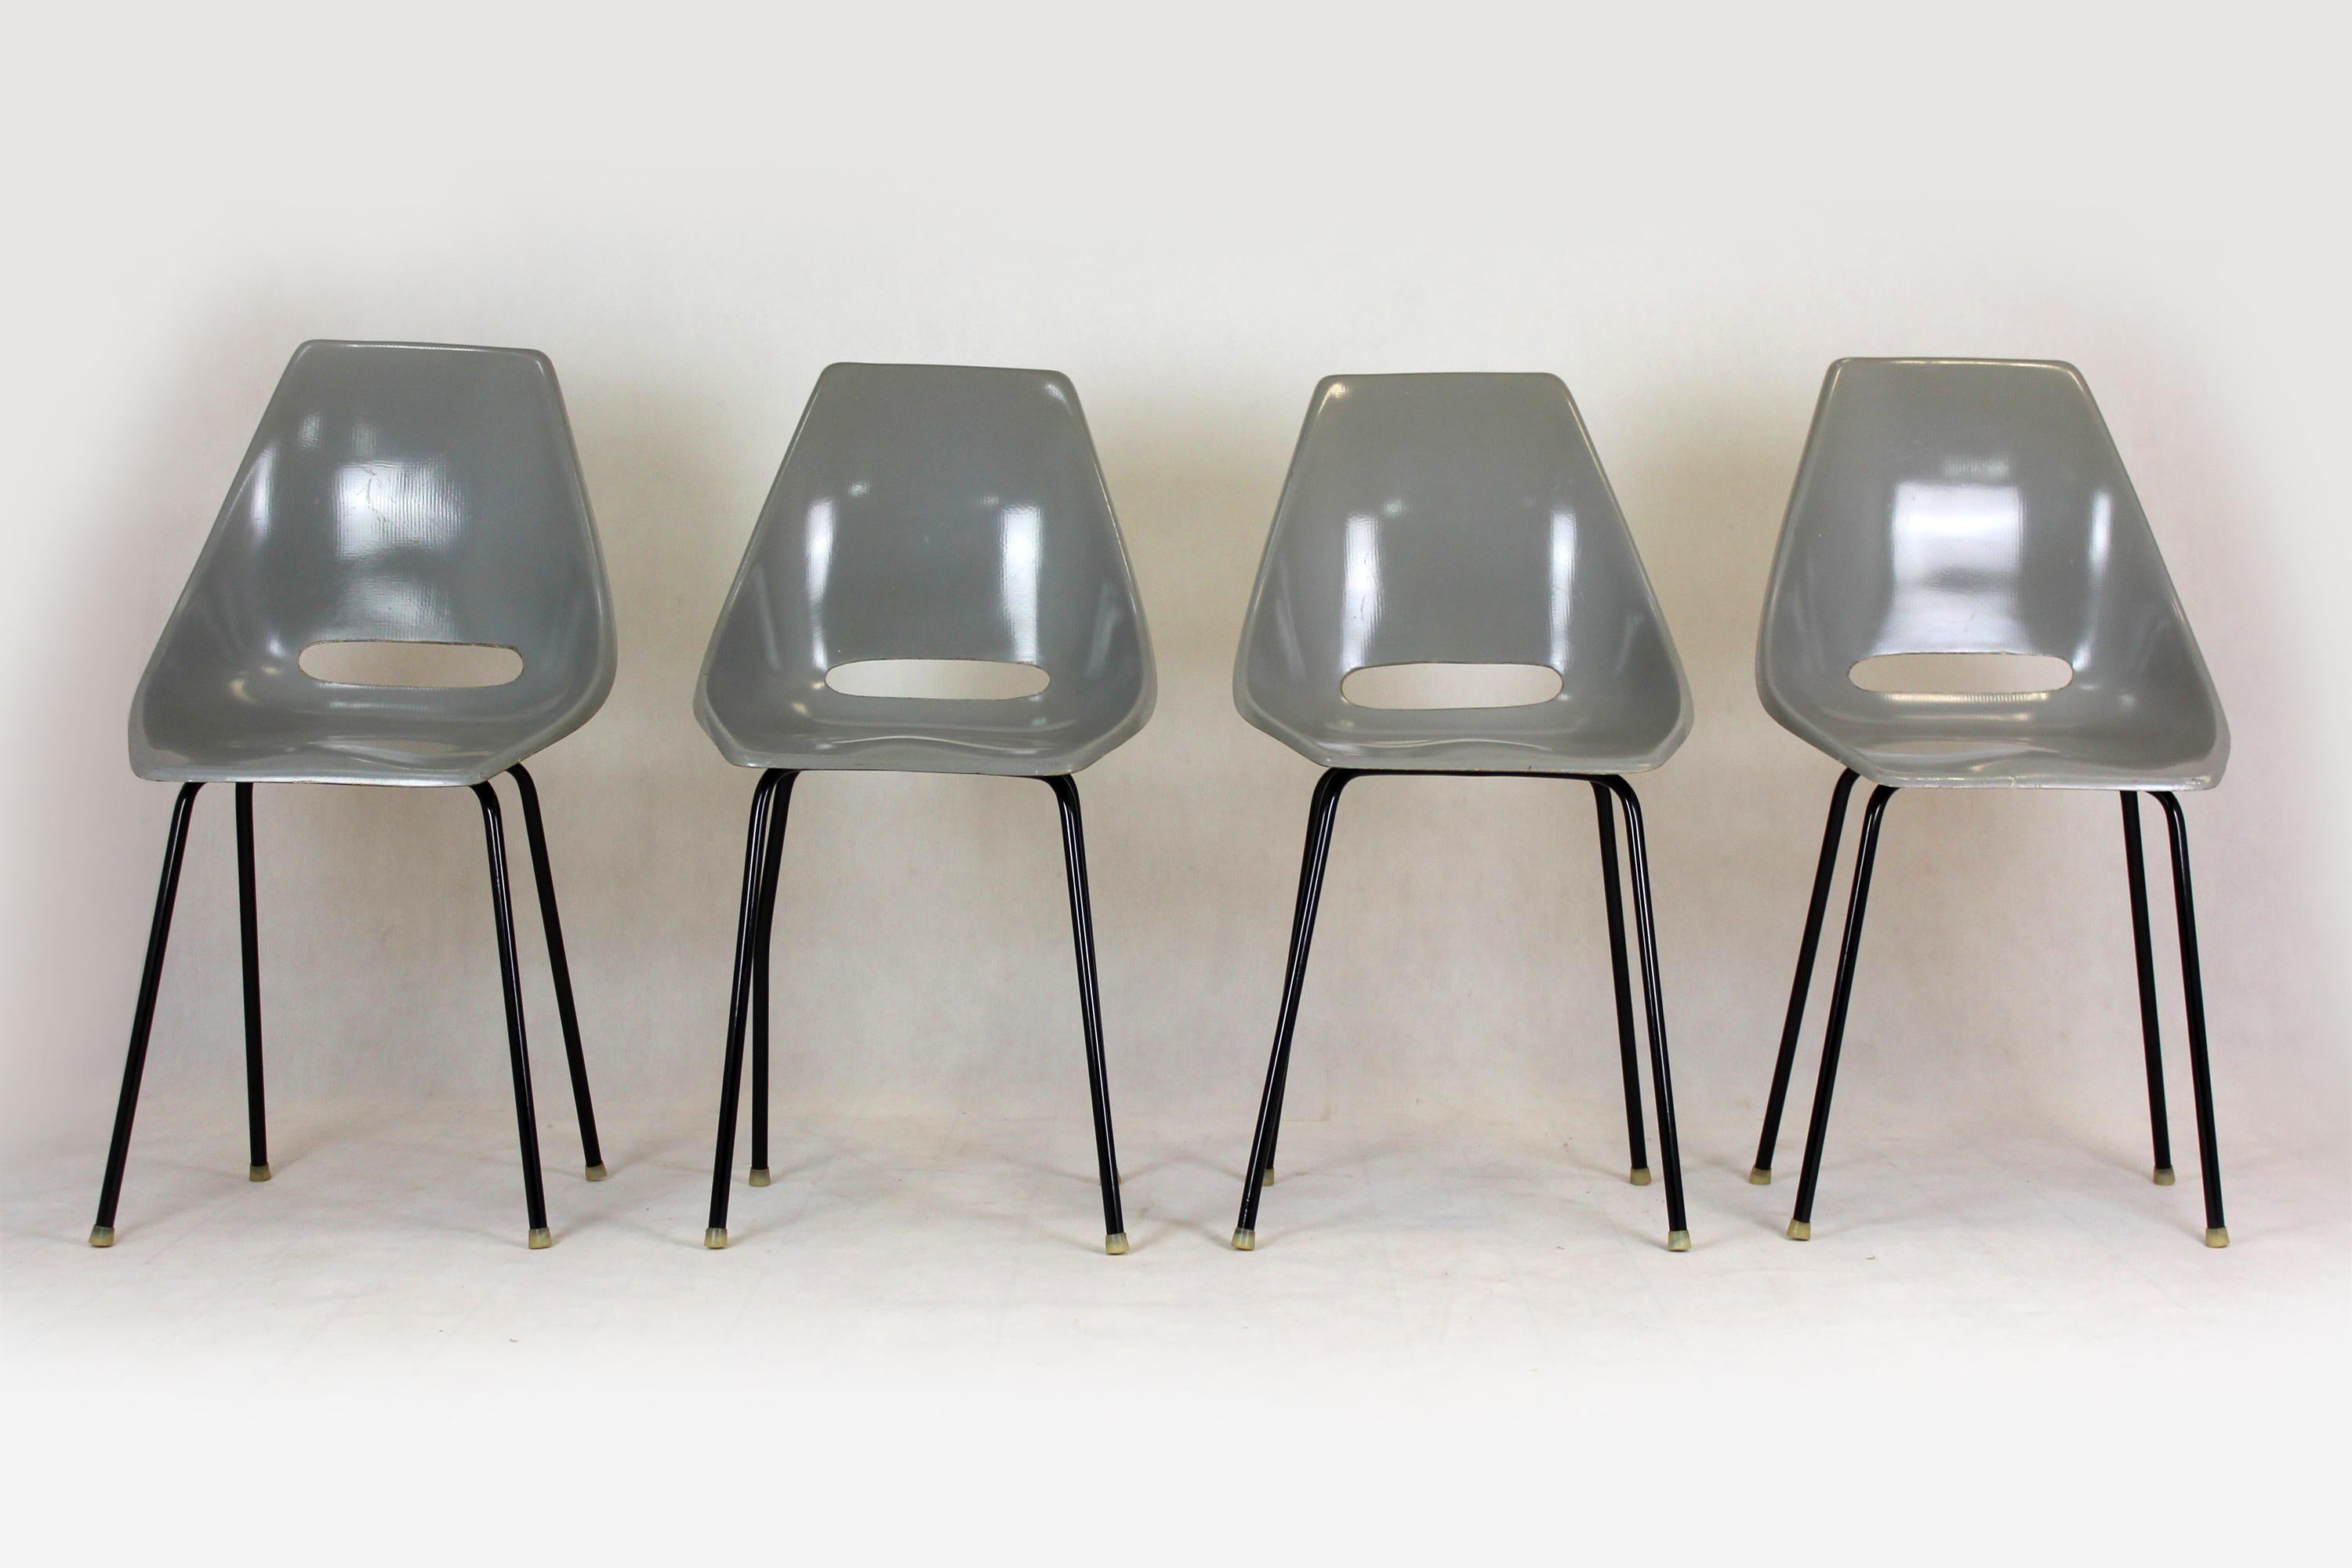 A set of four chairs manufactured by Vertex in the 1960s in Czechoslovakia. These chairs were designed by Miroslav Navratil in 1964, initially used in Tatra T3 trams - the most numerous tram in the world, popular mainly in the countries of the